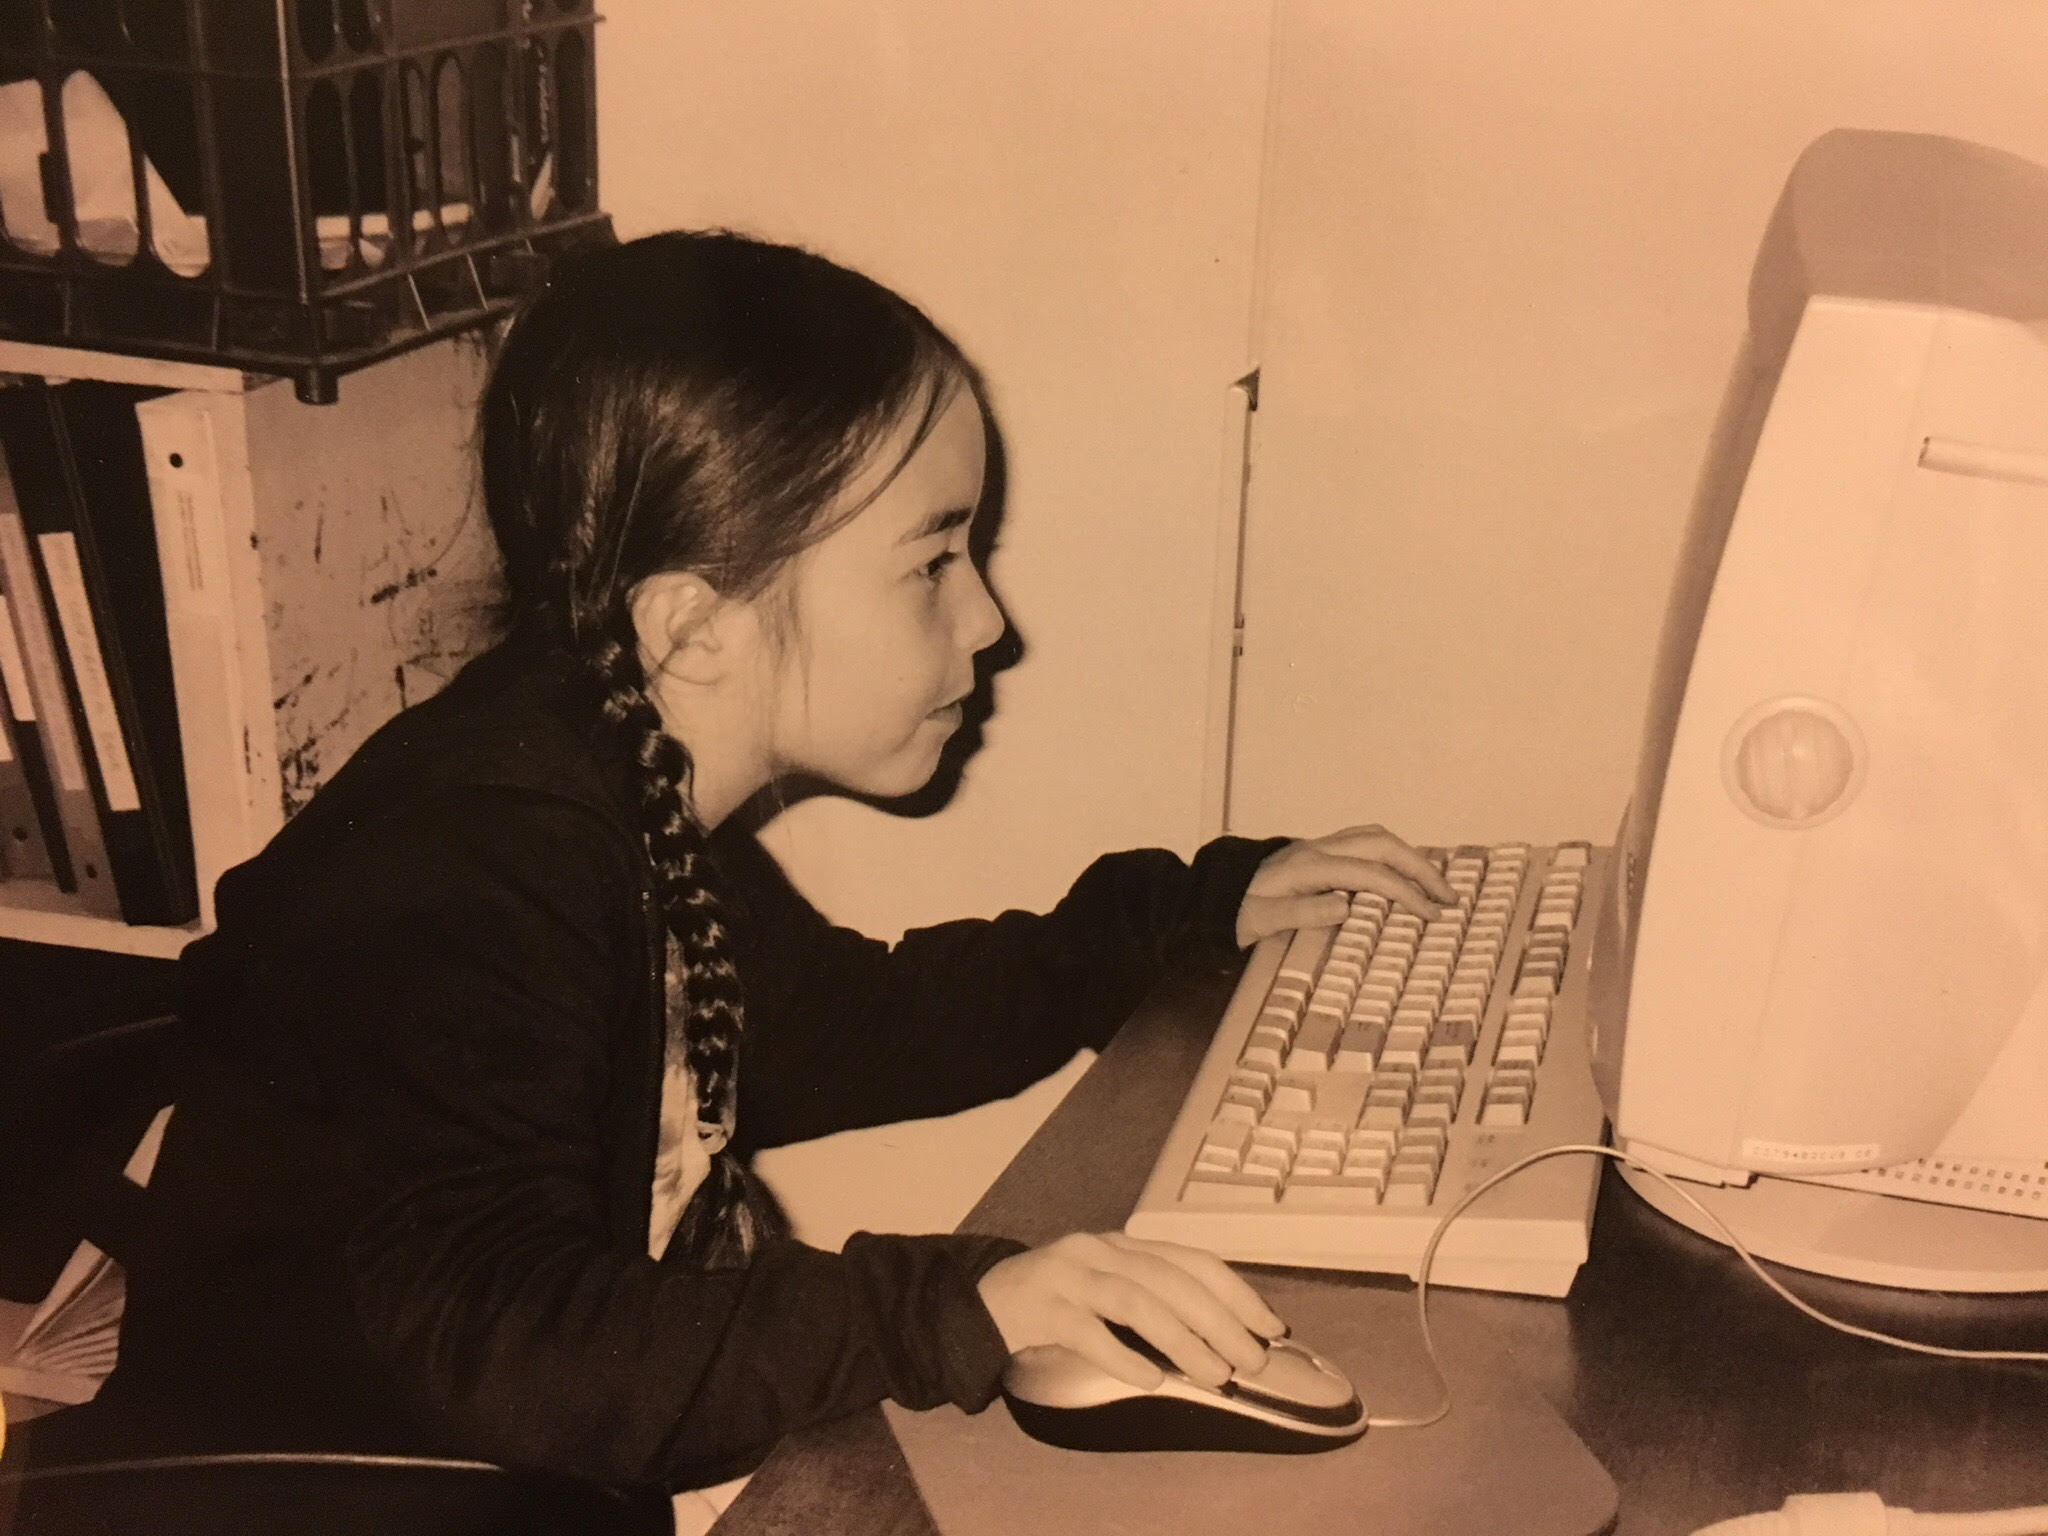  a young lady using the computer.